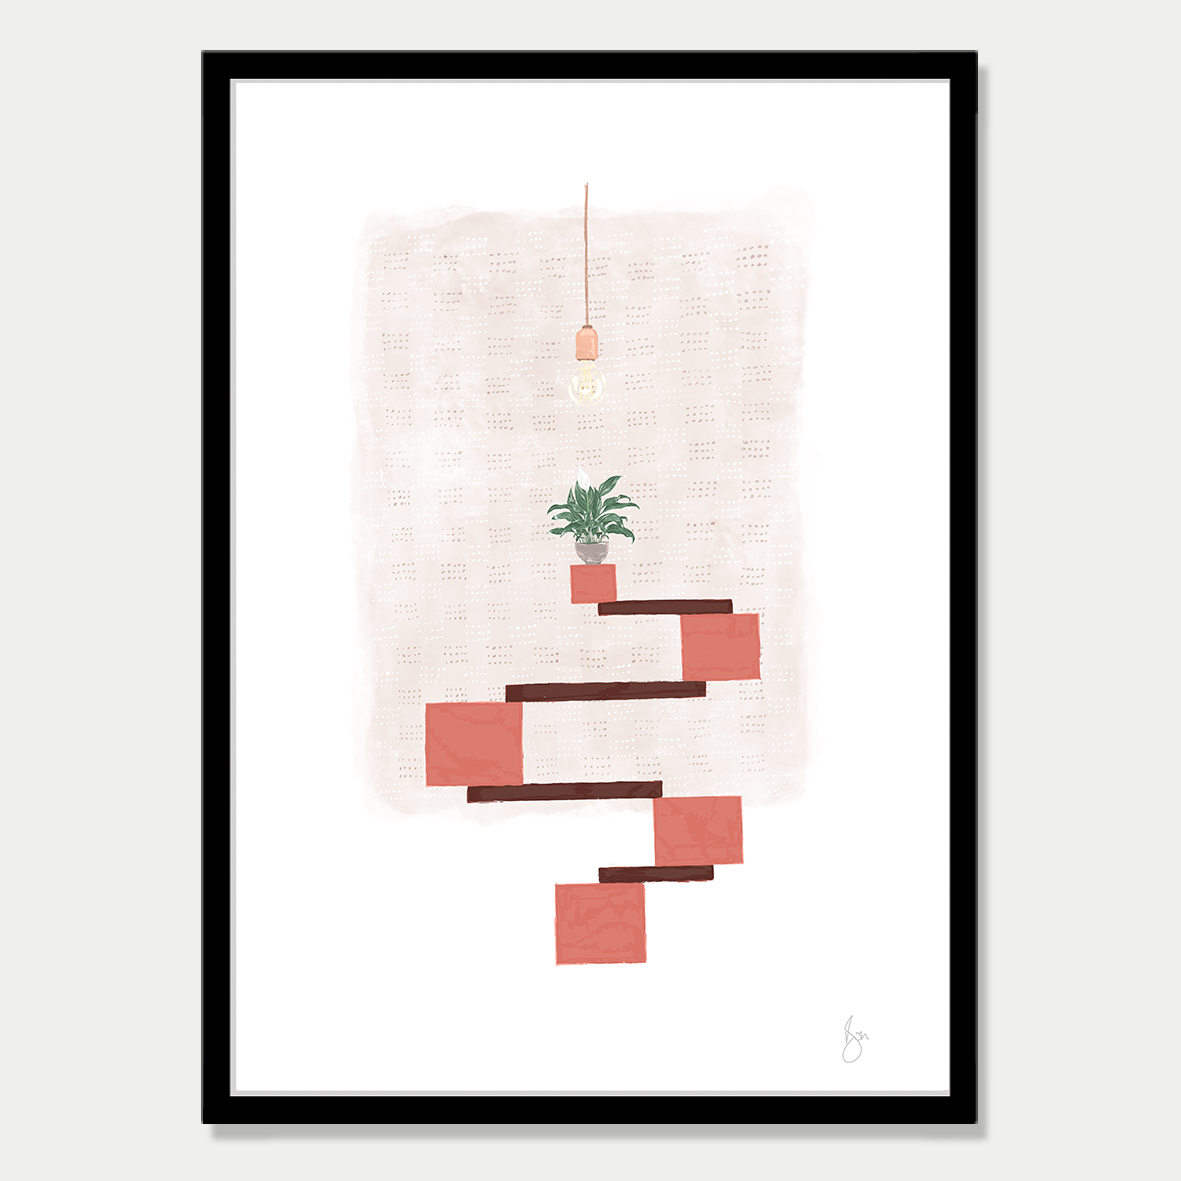 Art print of several blocks balancing with a peace lily sitting on top and a light blub hanging from above, in soft autumn colour palette by Bon Jung. Printed in New Zealand by endemicworld and framed in black.